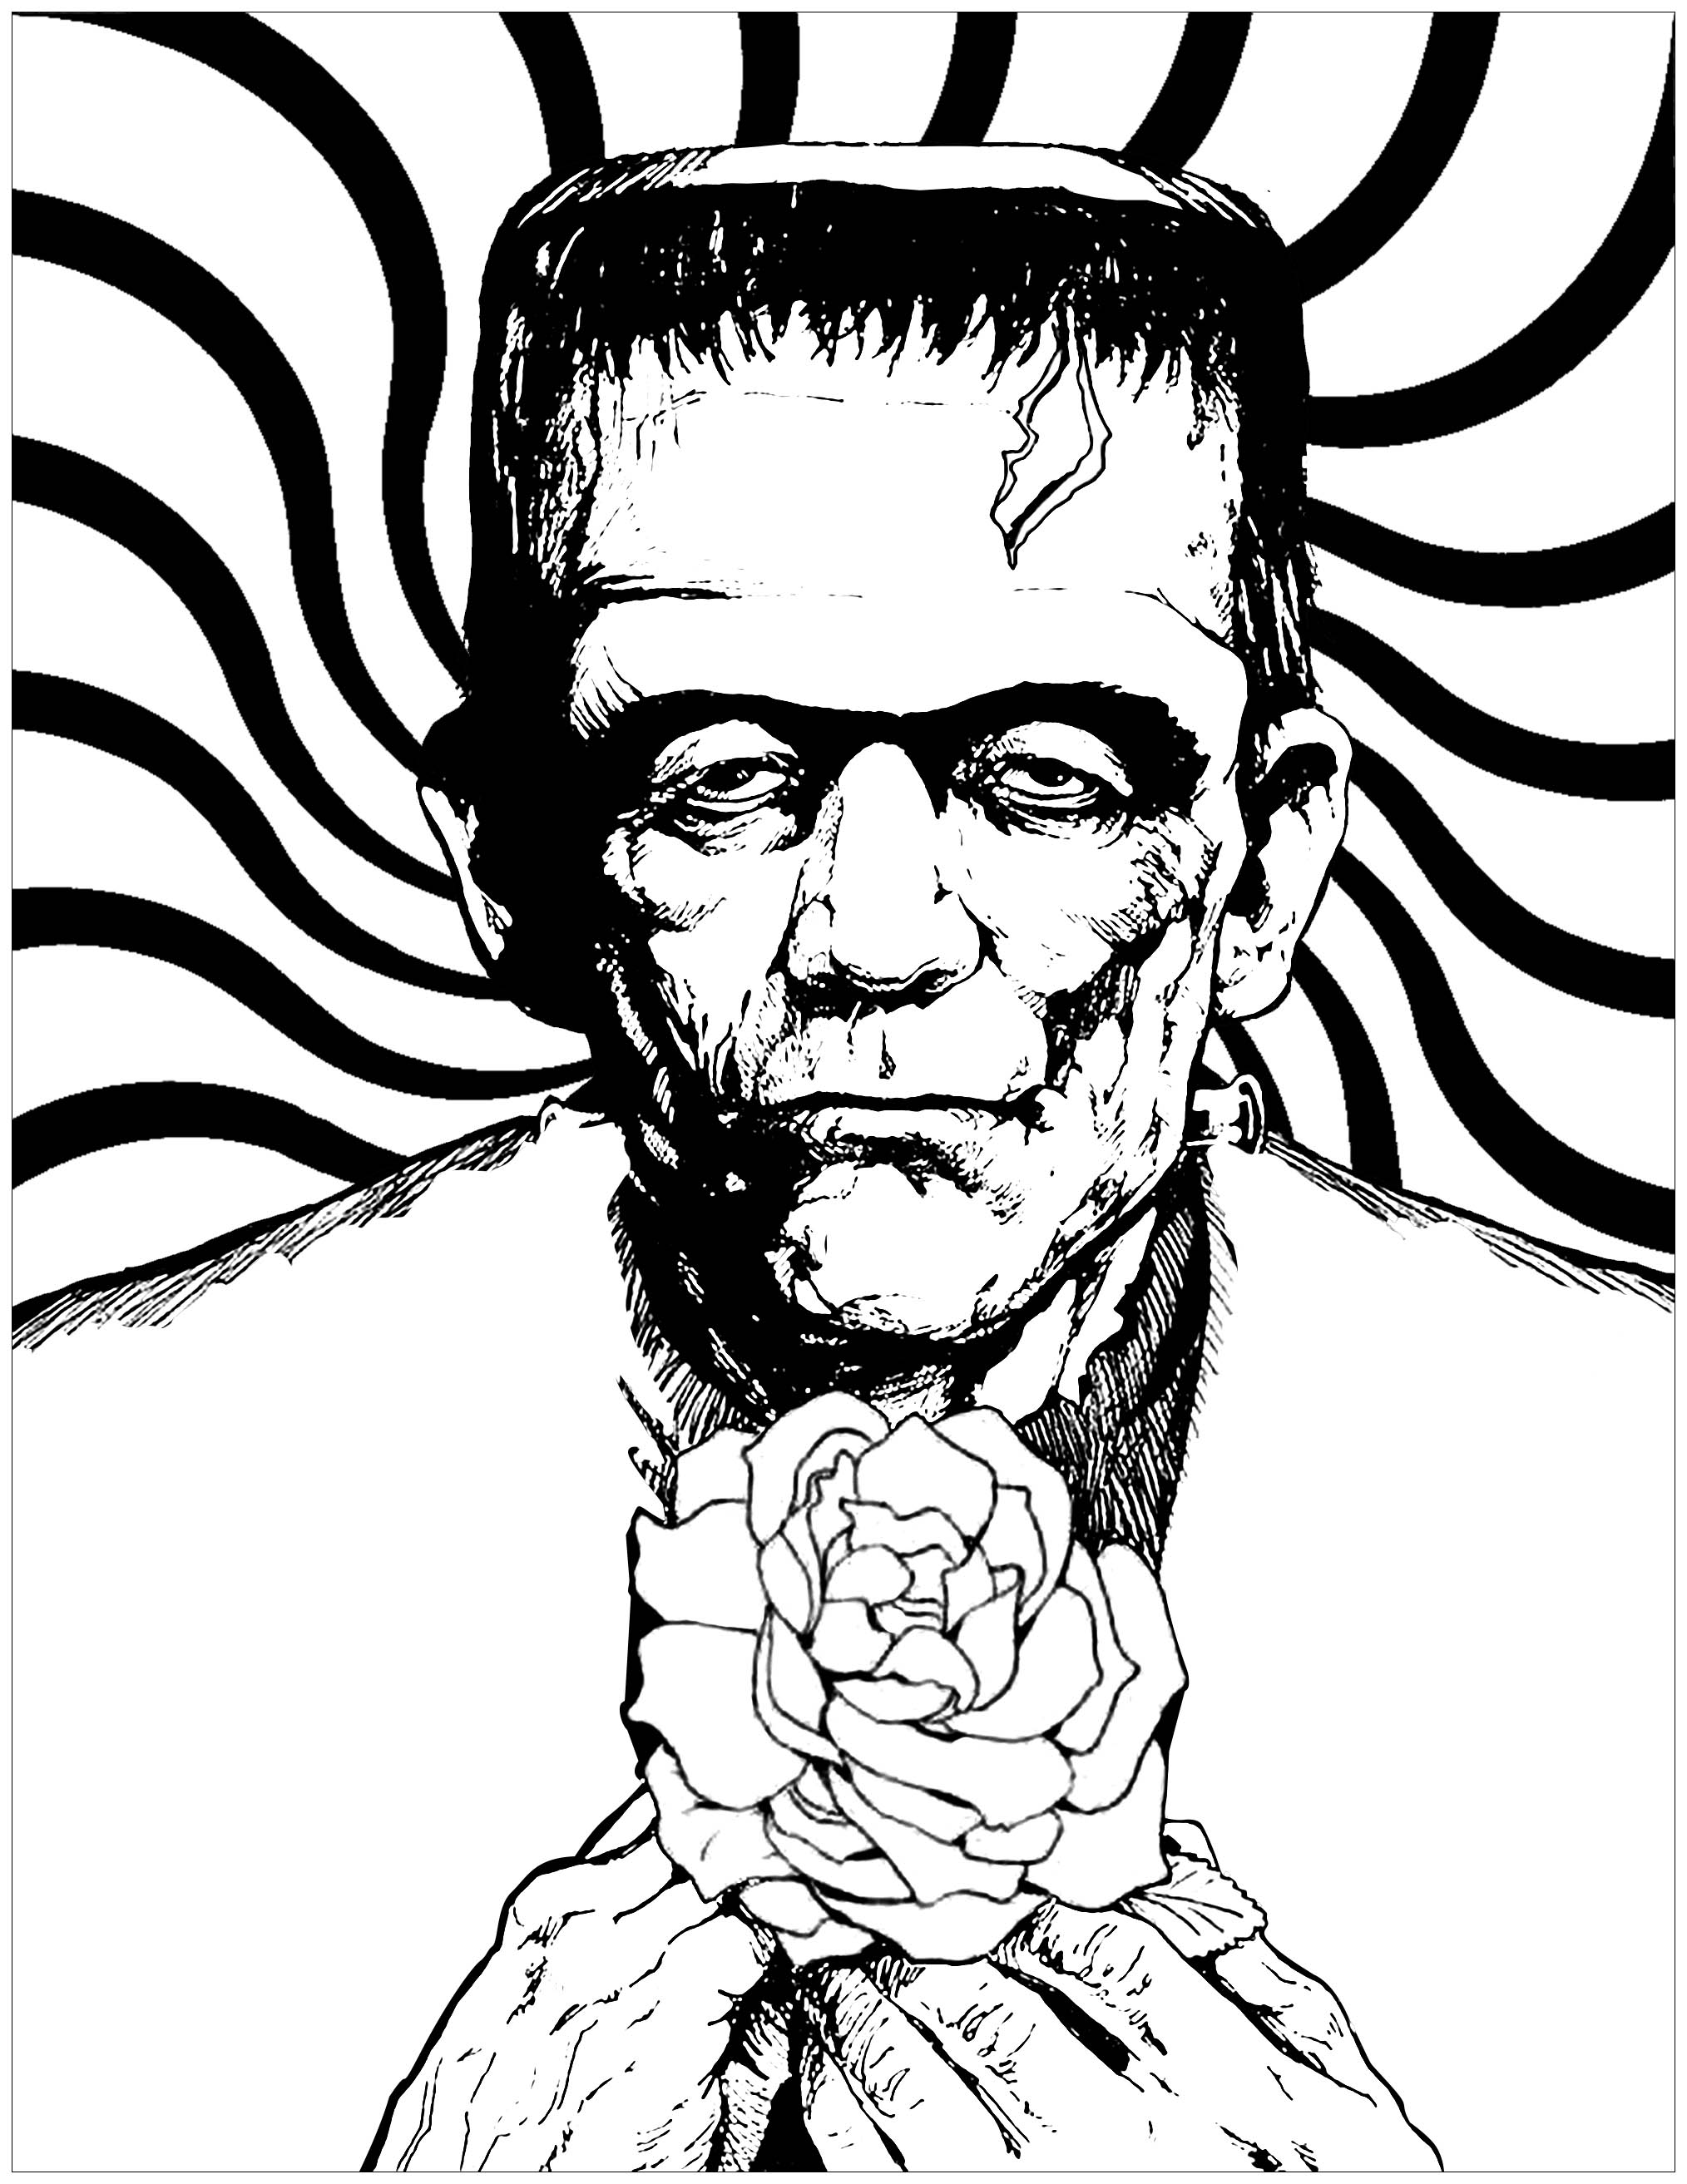 Frankenstein monster, with a cute rose